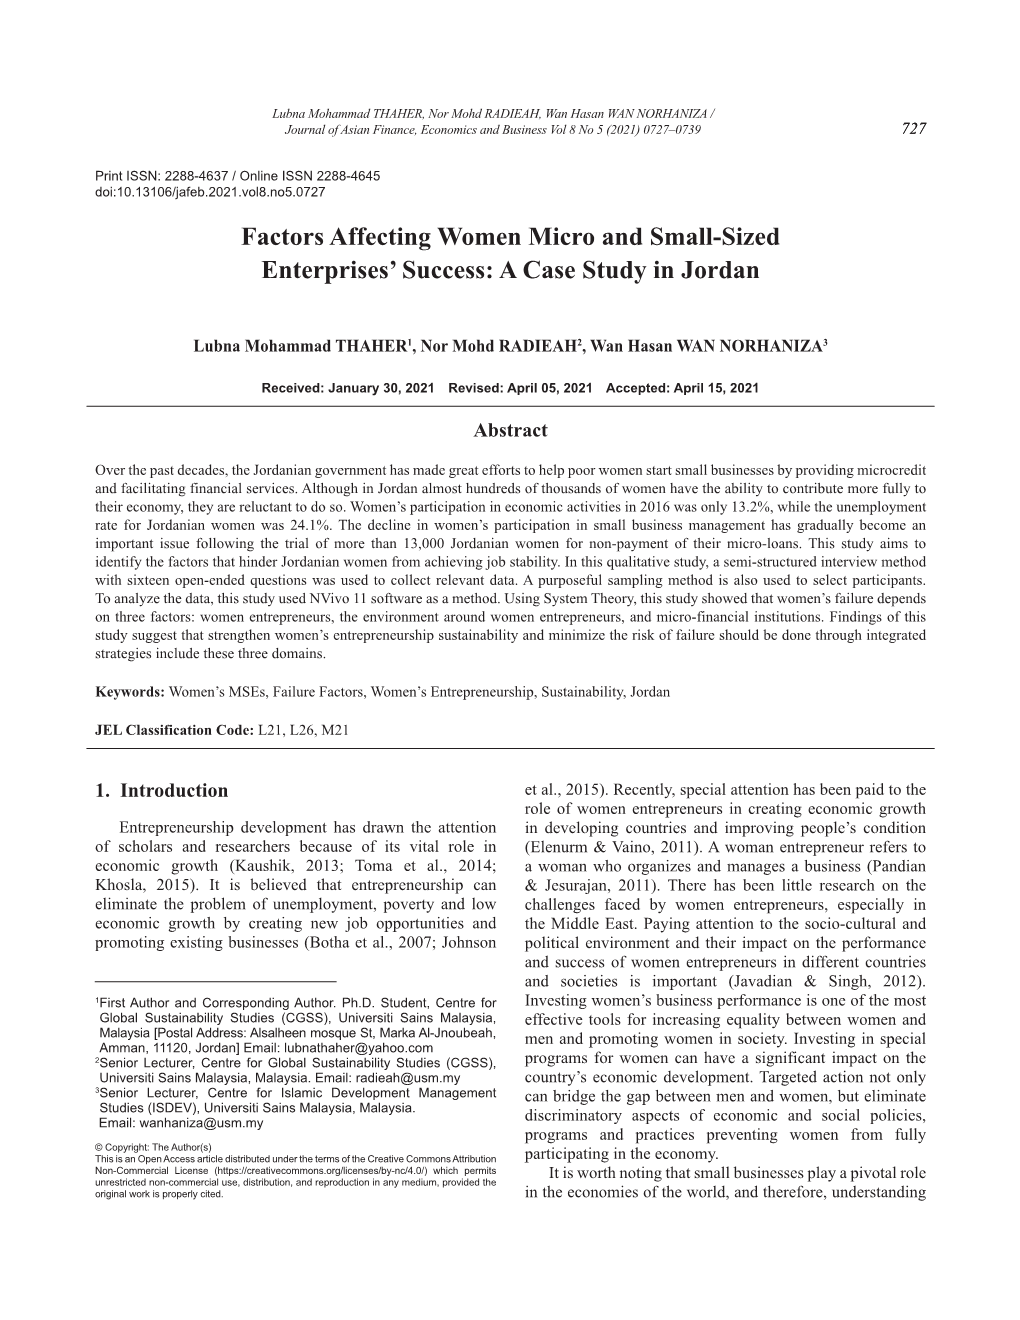 Factors Affecting Women Micro and Small-Sized Enterprises' Success: a Case Study in Jordan